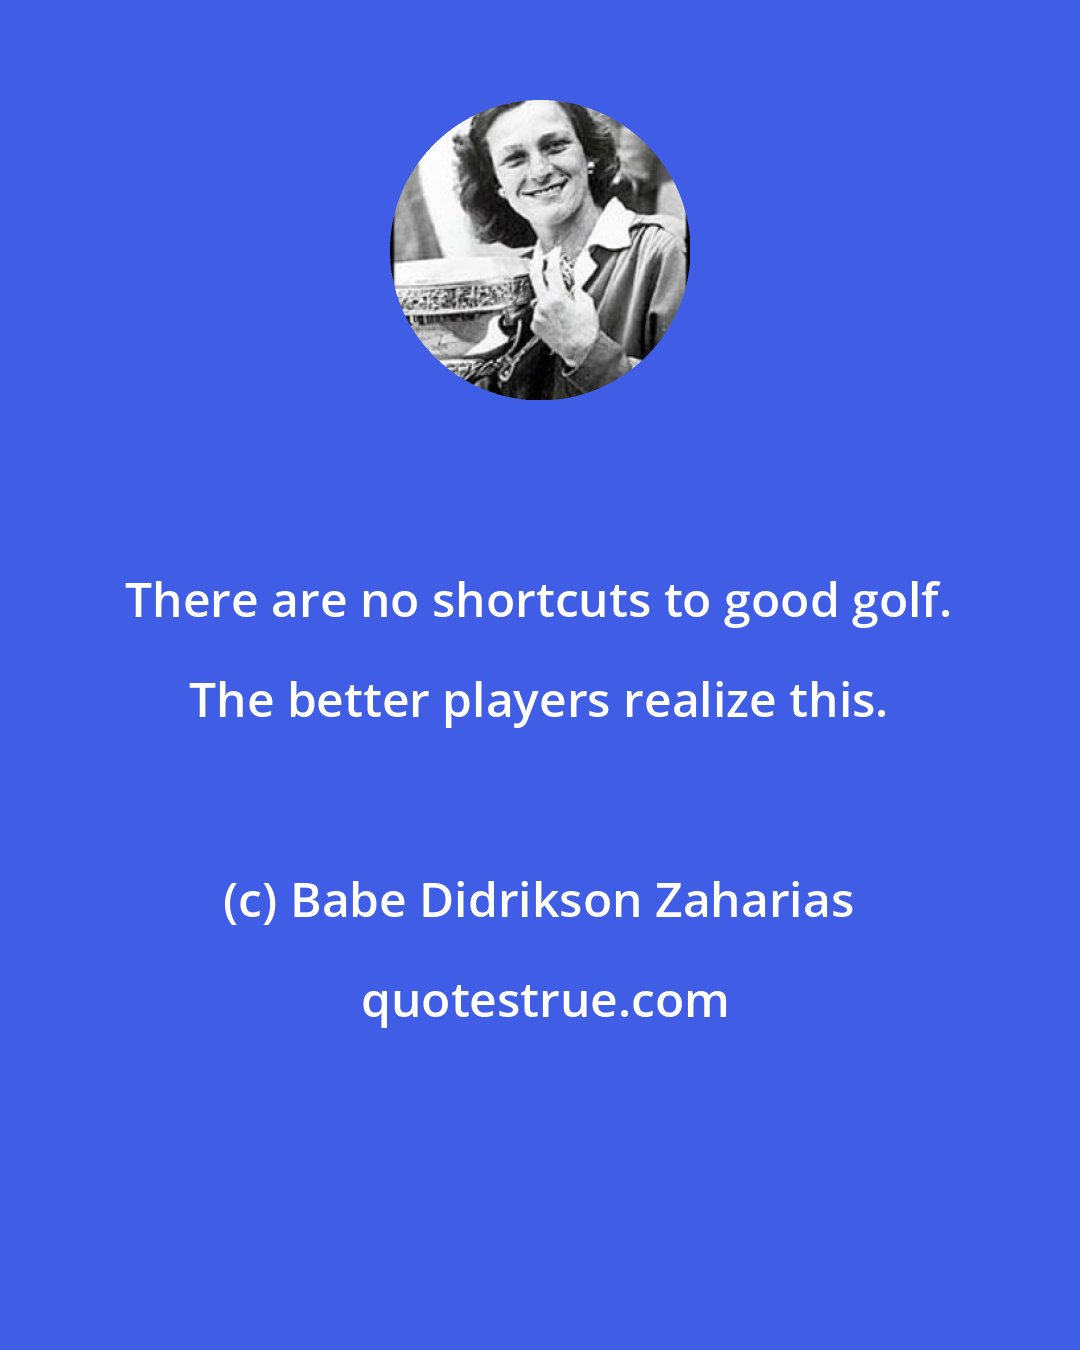 Babe Didrikson Zaharias: There are no shortcuts to good golf. The better players realize this.